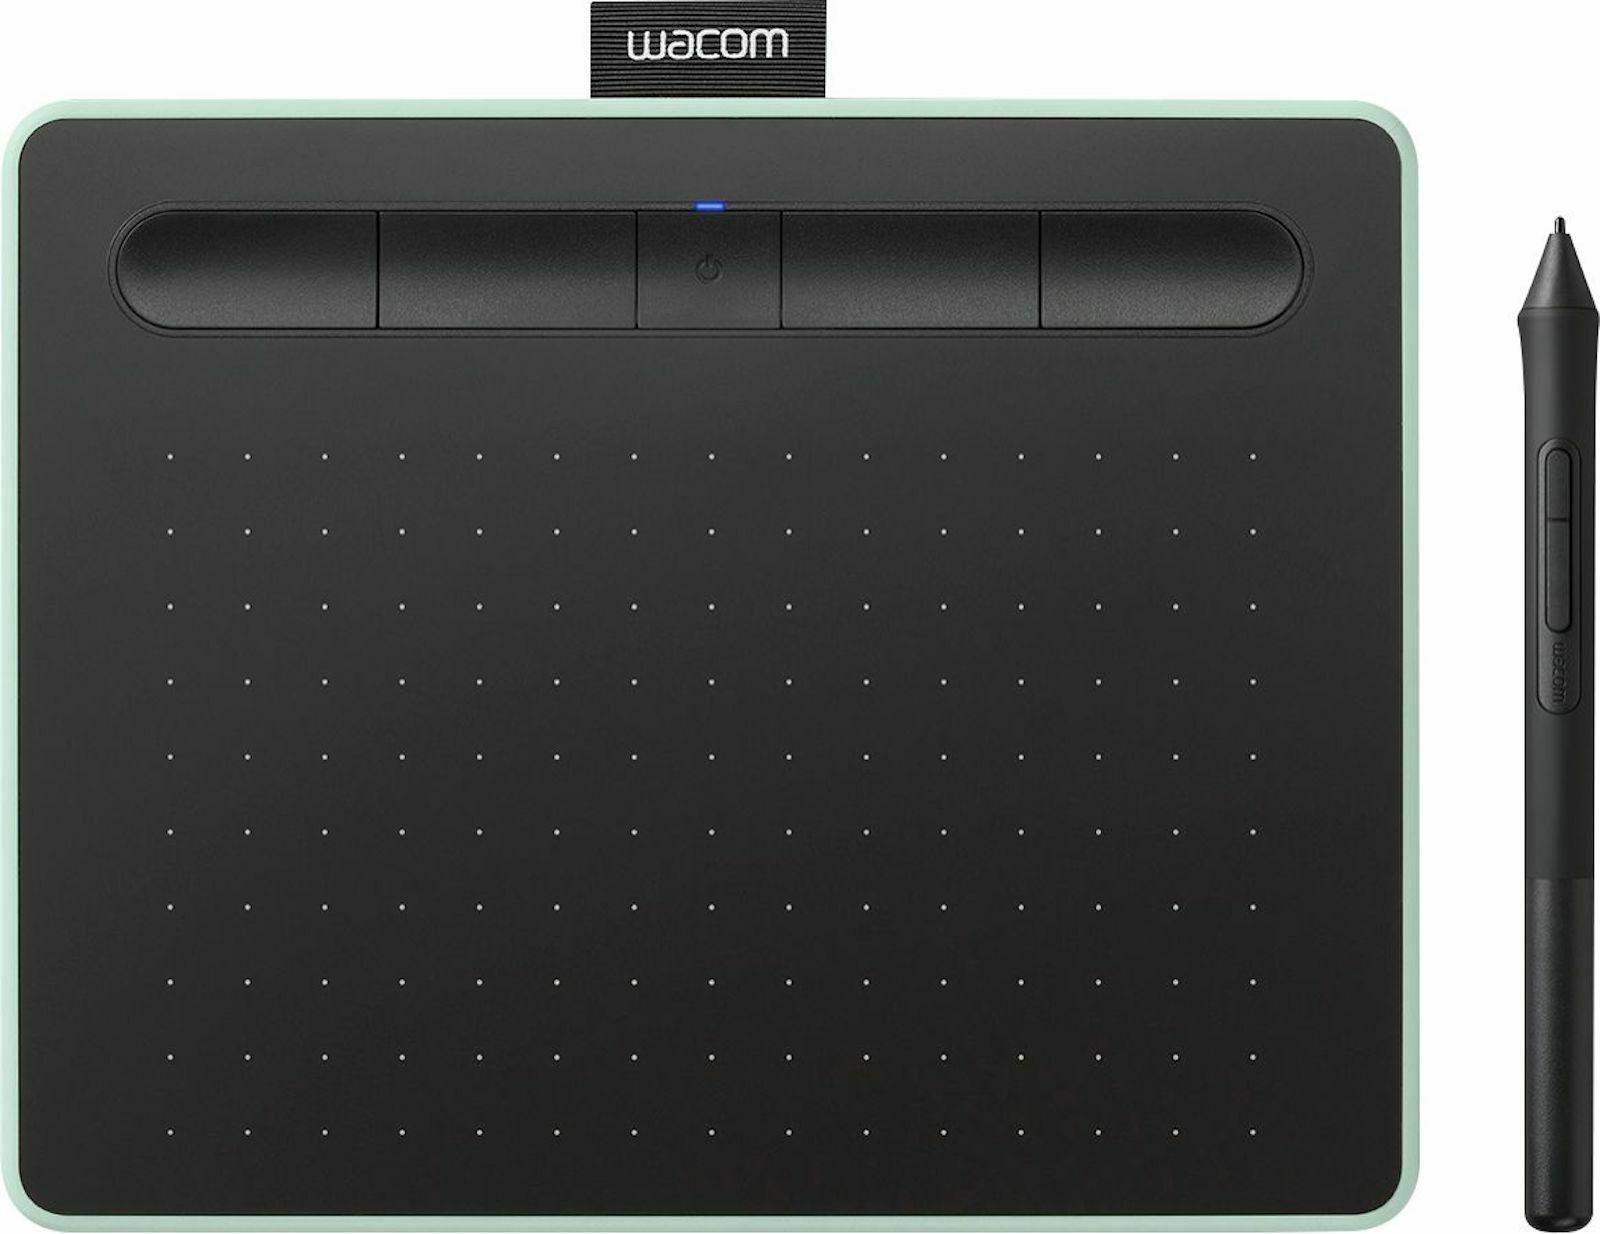 Wacom Intuos Graphics Drawing Tablet CTL4100 w. Stylus PC Mac Chromebook Android